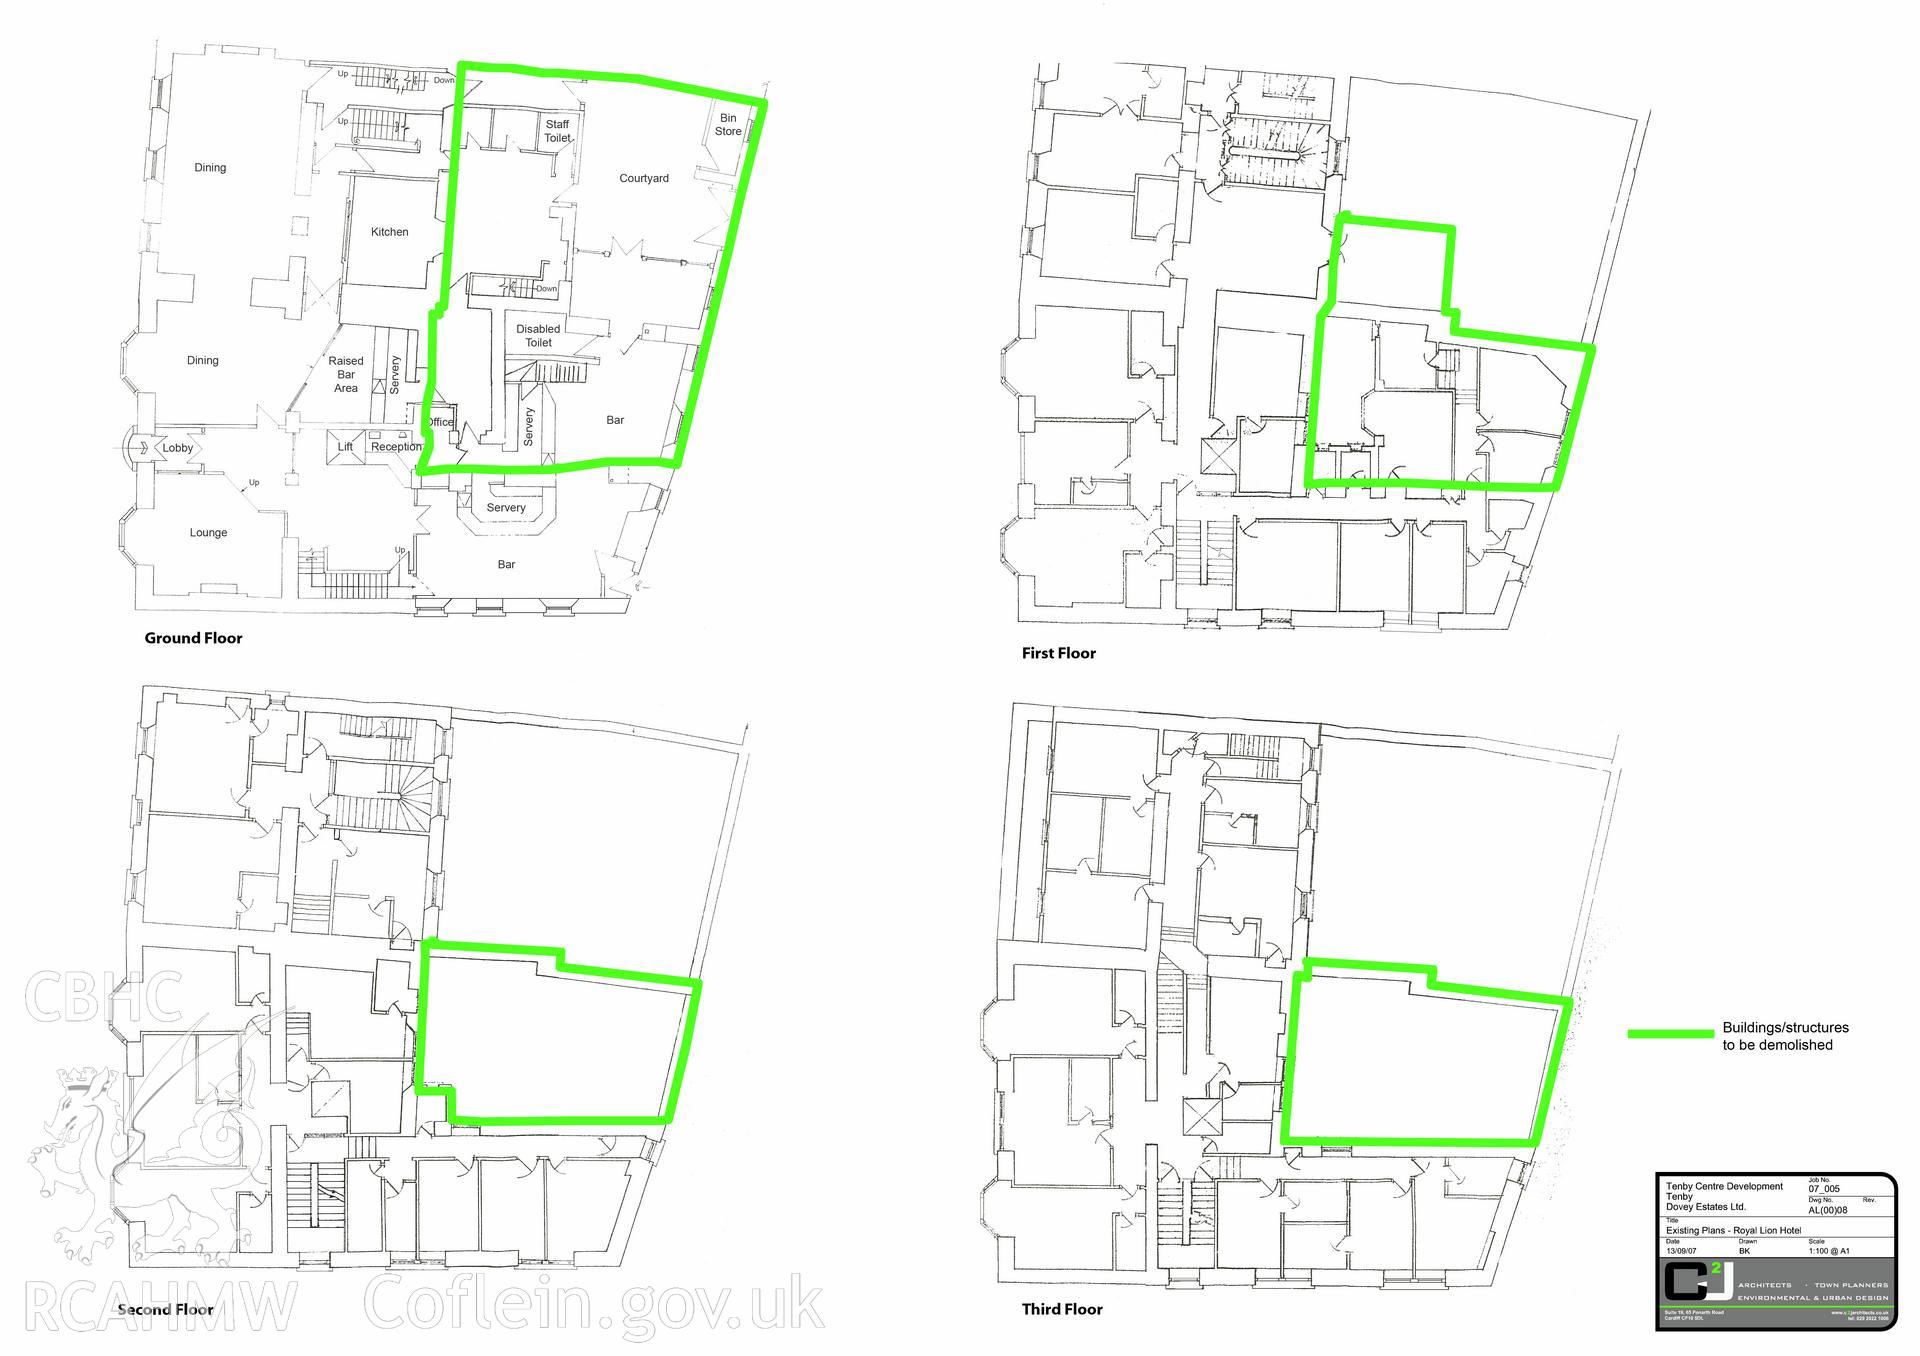 Digital plans for Tenby Centre Development - existing plans and elevations - Royal Lion Hotel